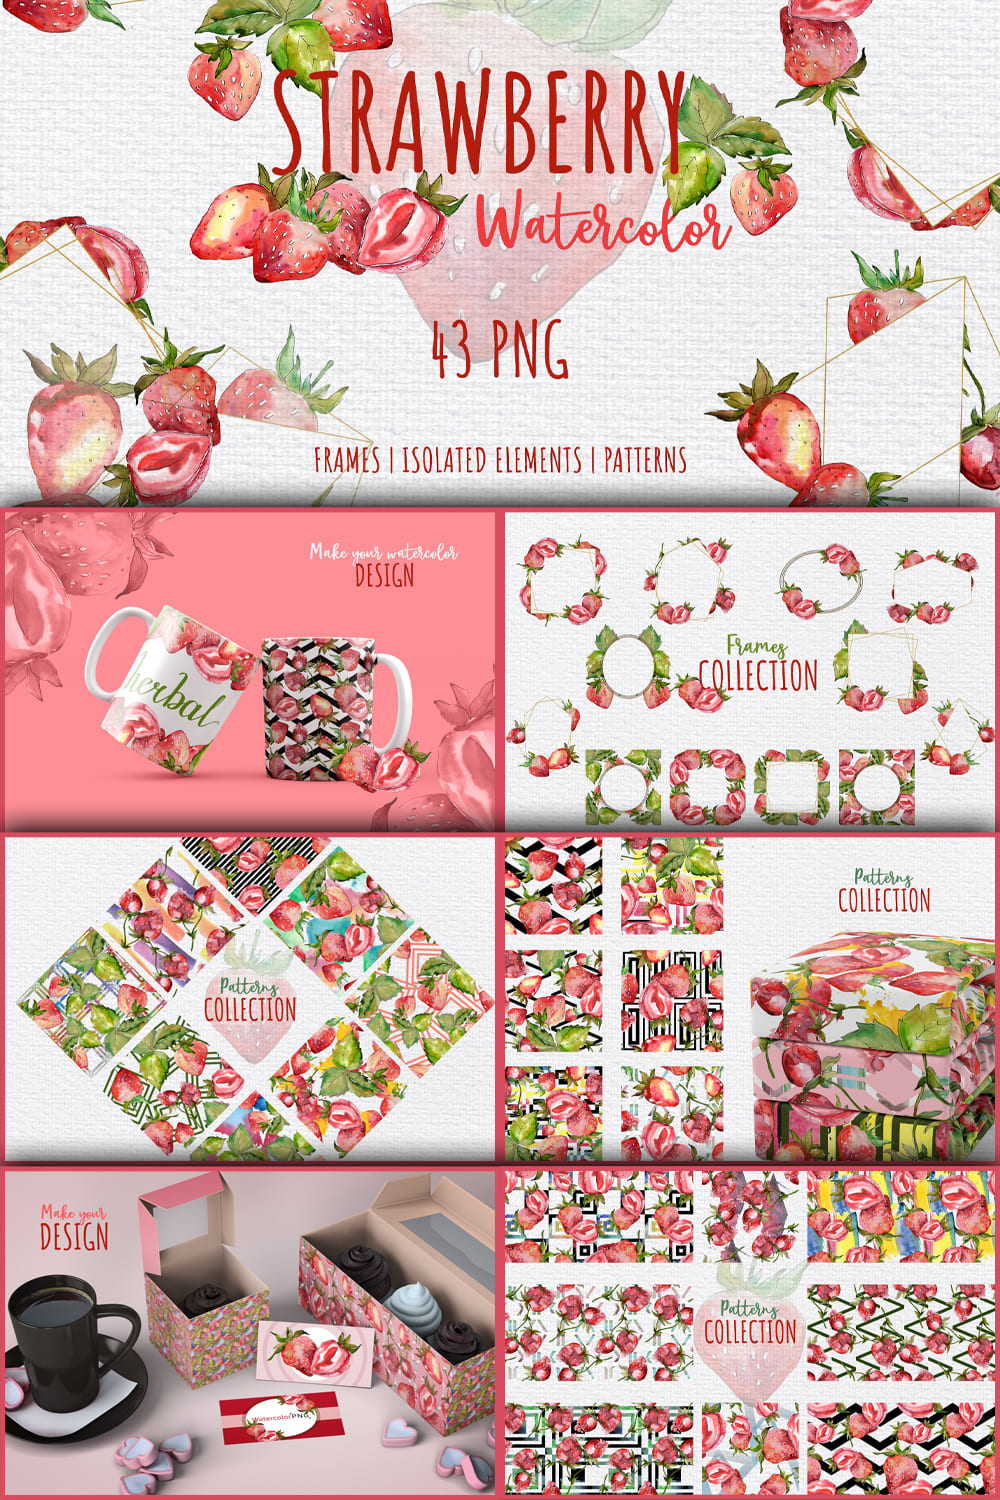 266557 strawberry paradise watercolor png pinterest 1000 1500 665